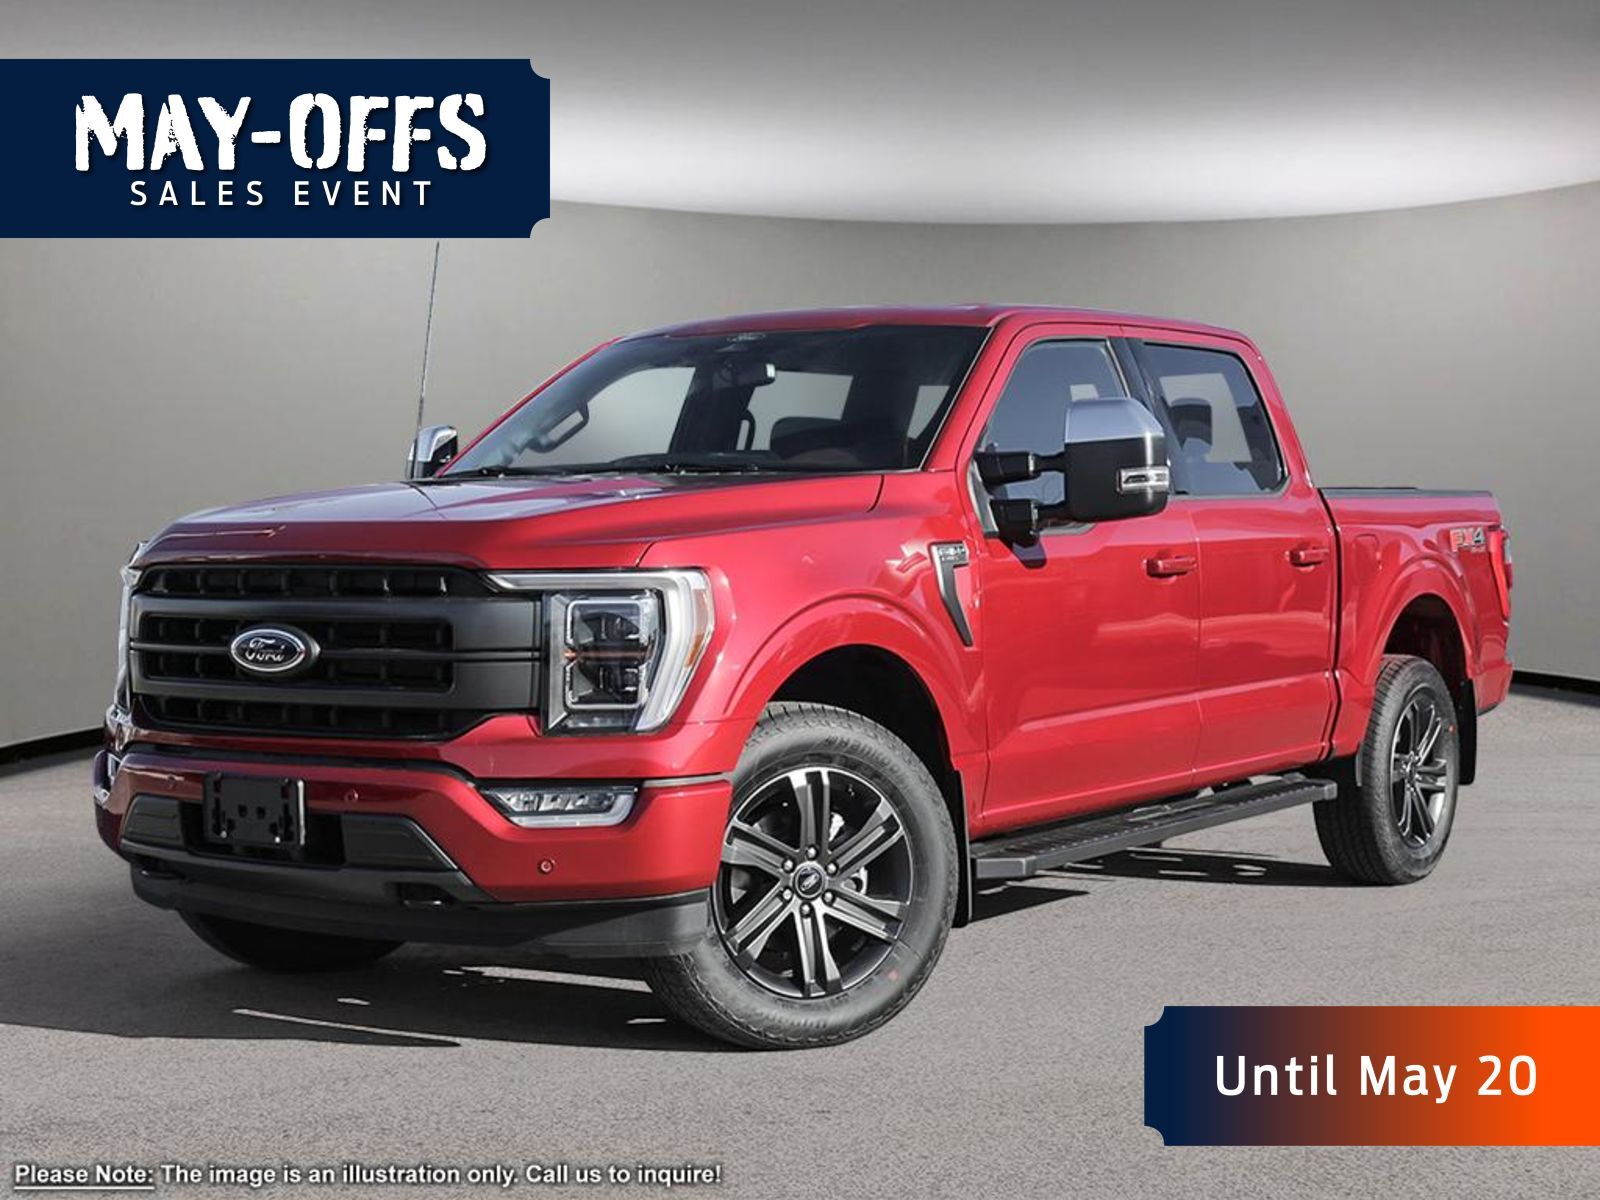 2023 Ford F-150 502A LARIAT, 3.5L ECOBOOST, CONNECTED NAVIGATION, 